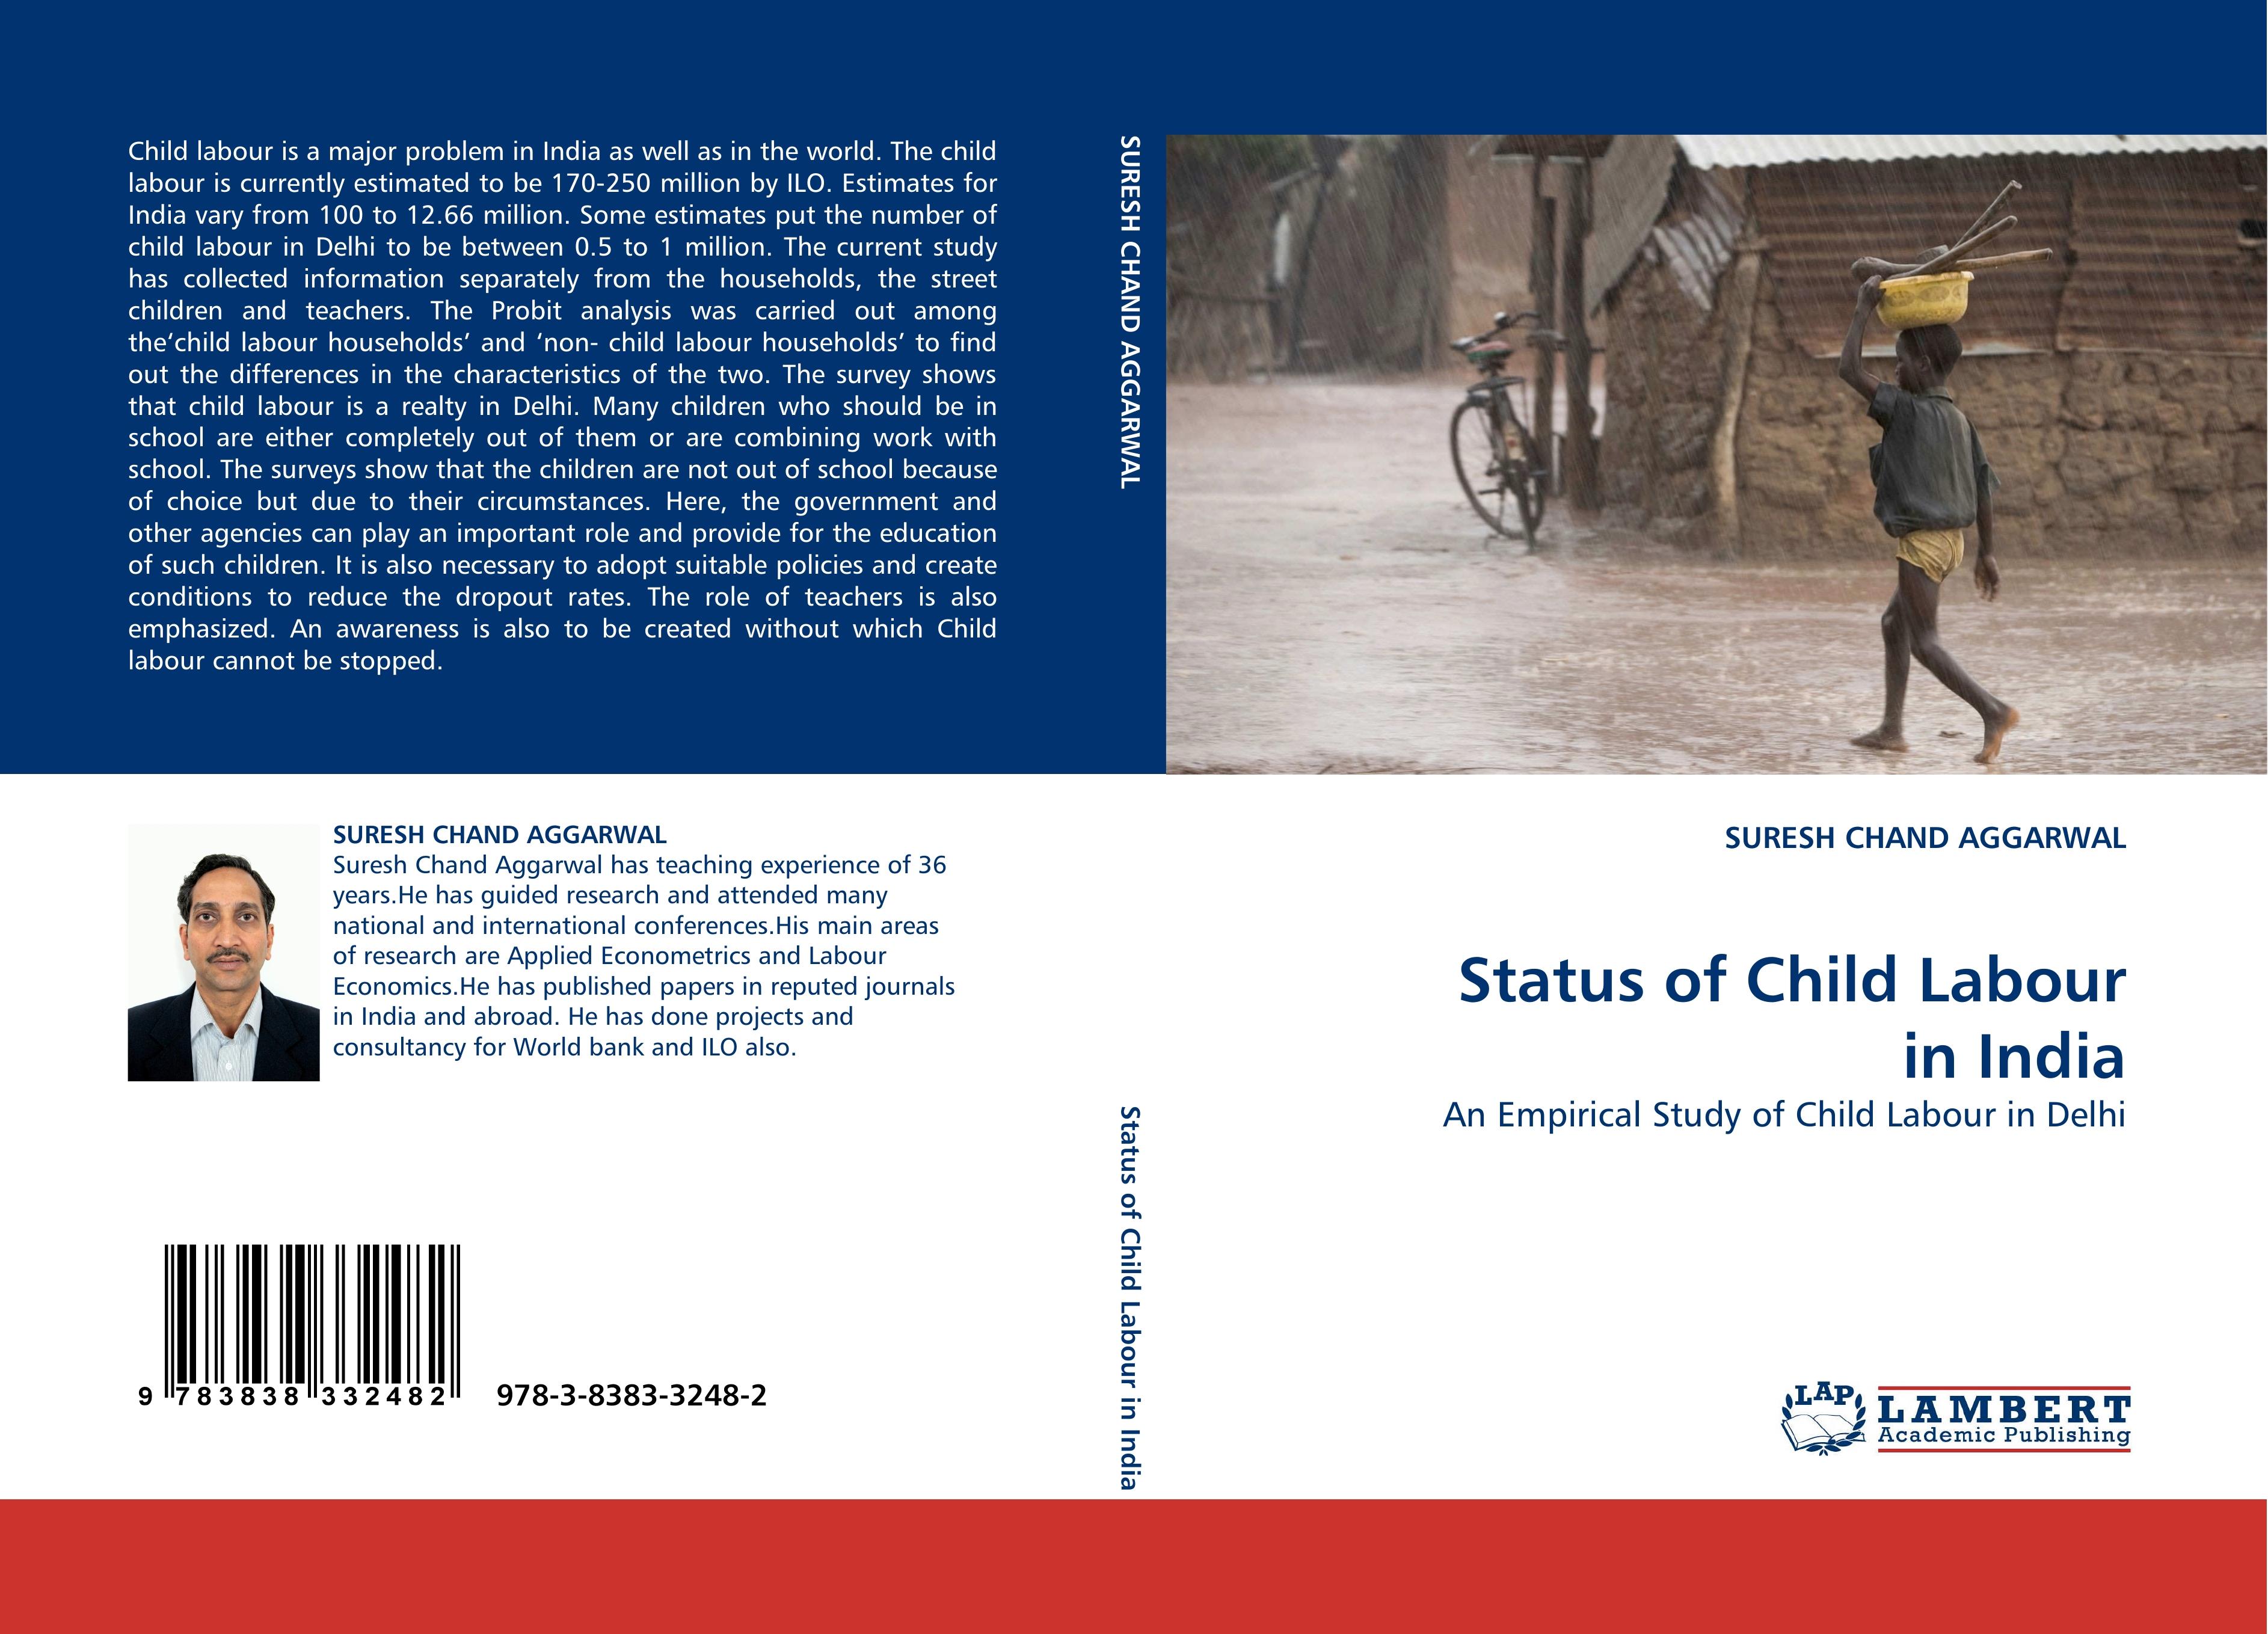 Status of Child Labour in India - SURESH CHAND AGGARWAL